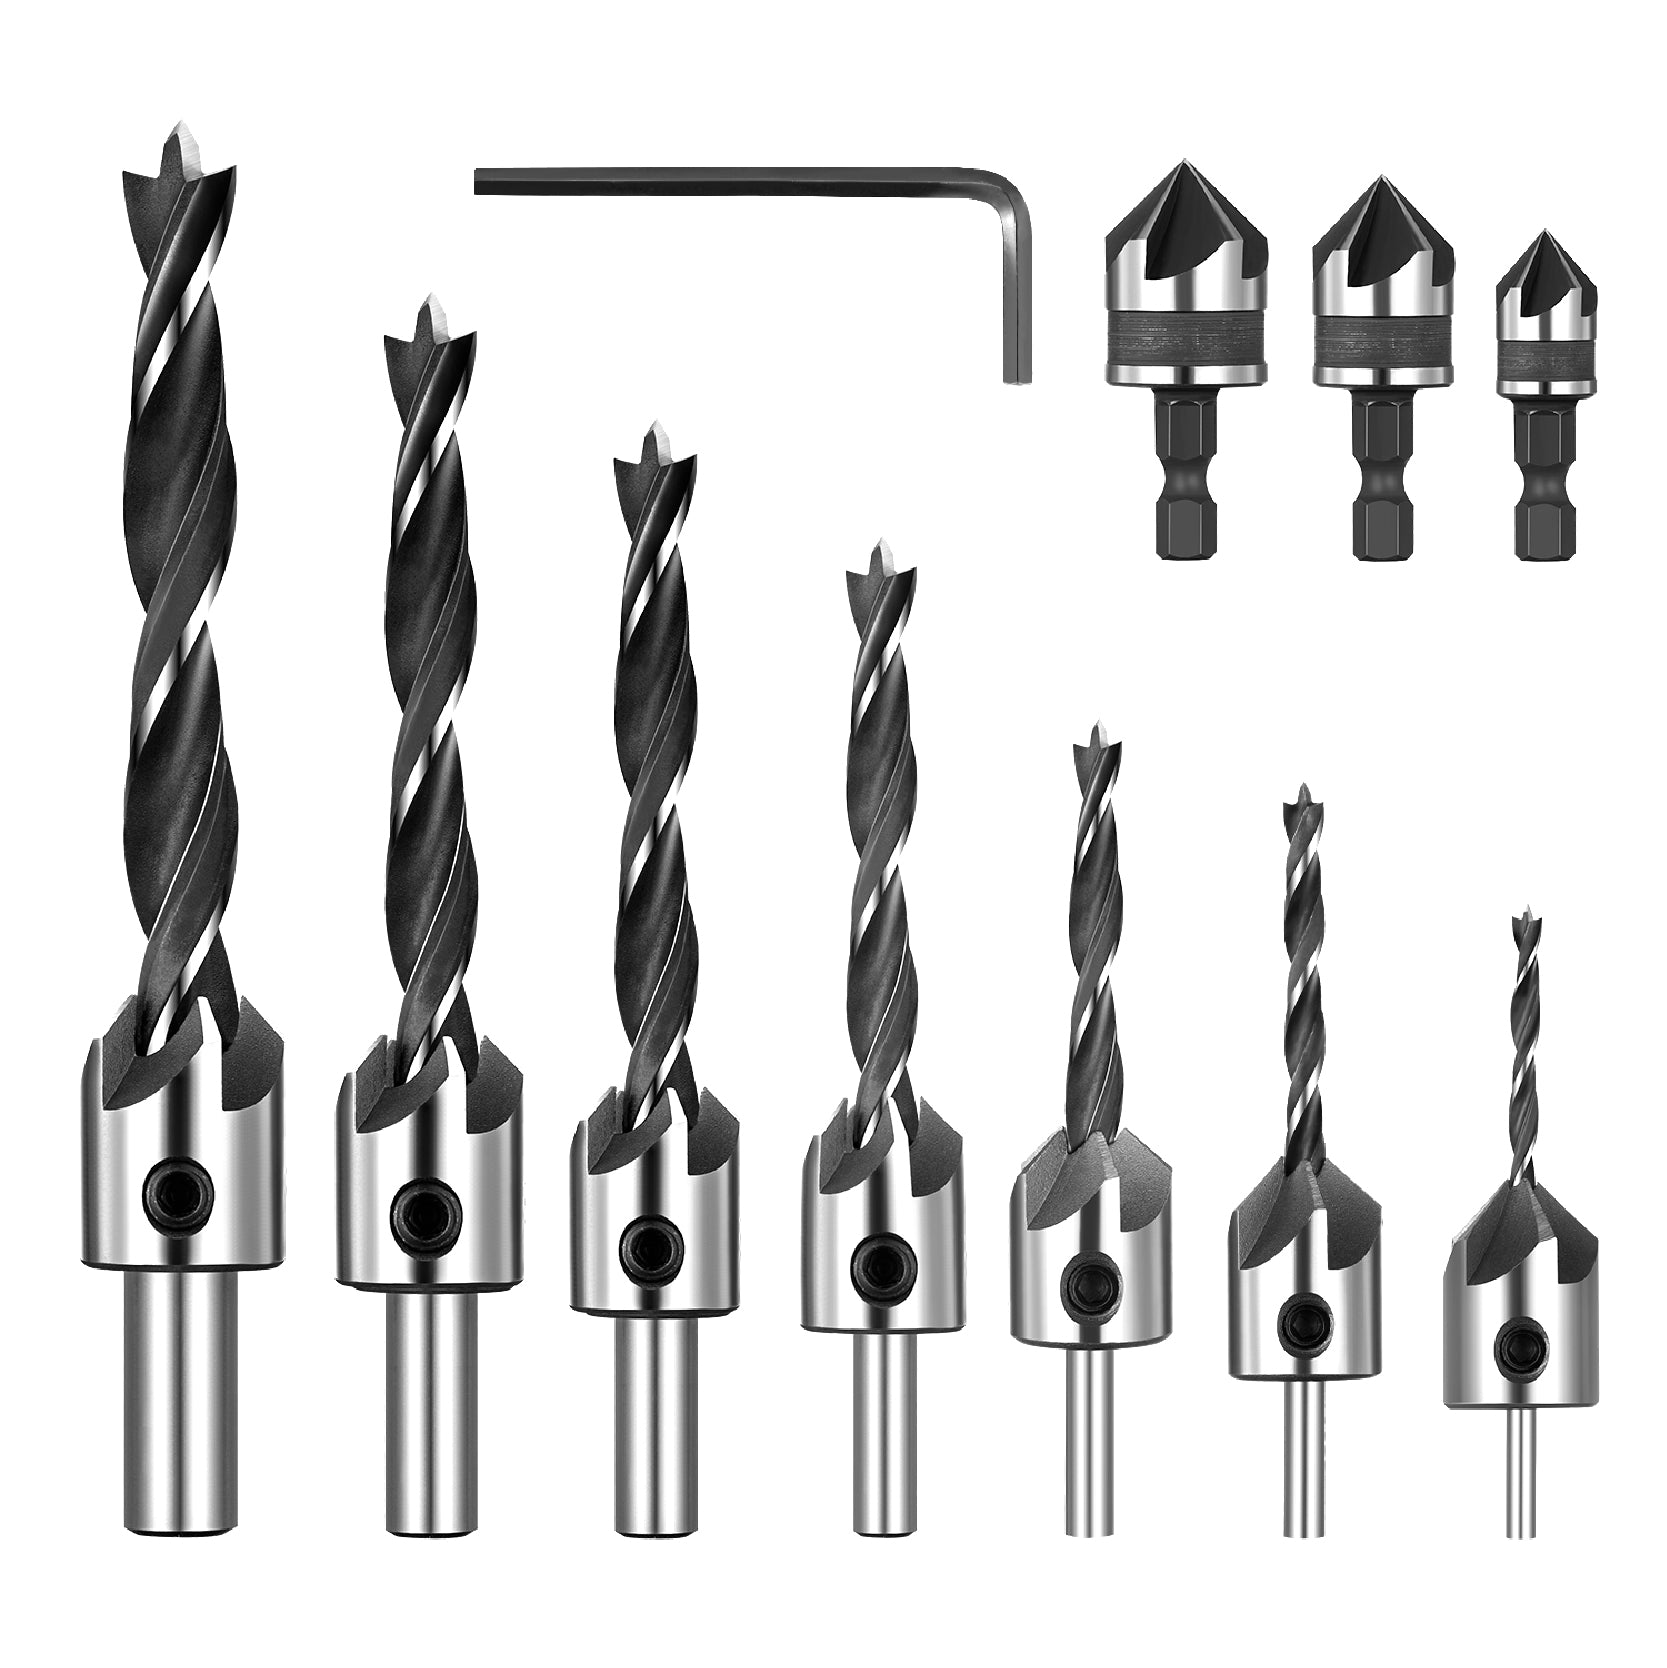 Applicable to plywood, soft metal, plastics, fiberboard, wood planks, particleboard, High Carbon Steel Countersink Drill Bits Set, Double Flutes, for Woodworking